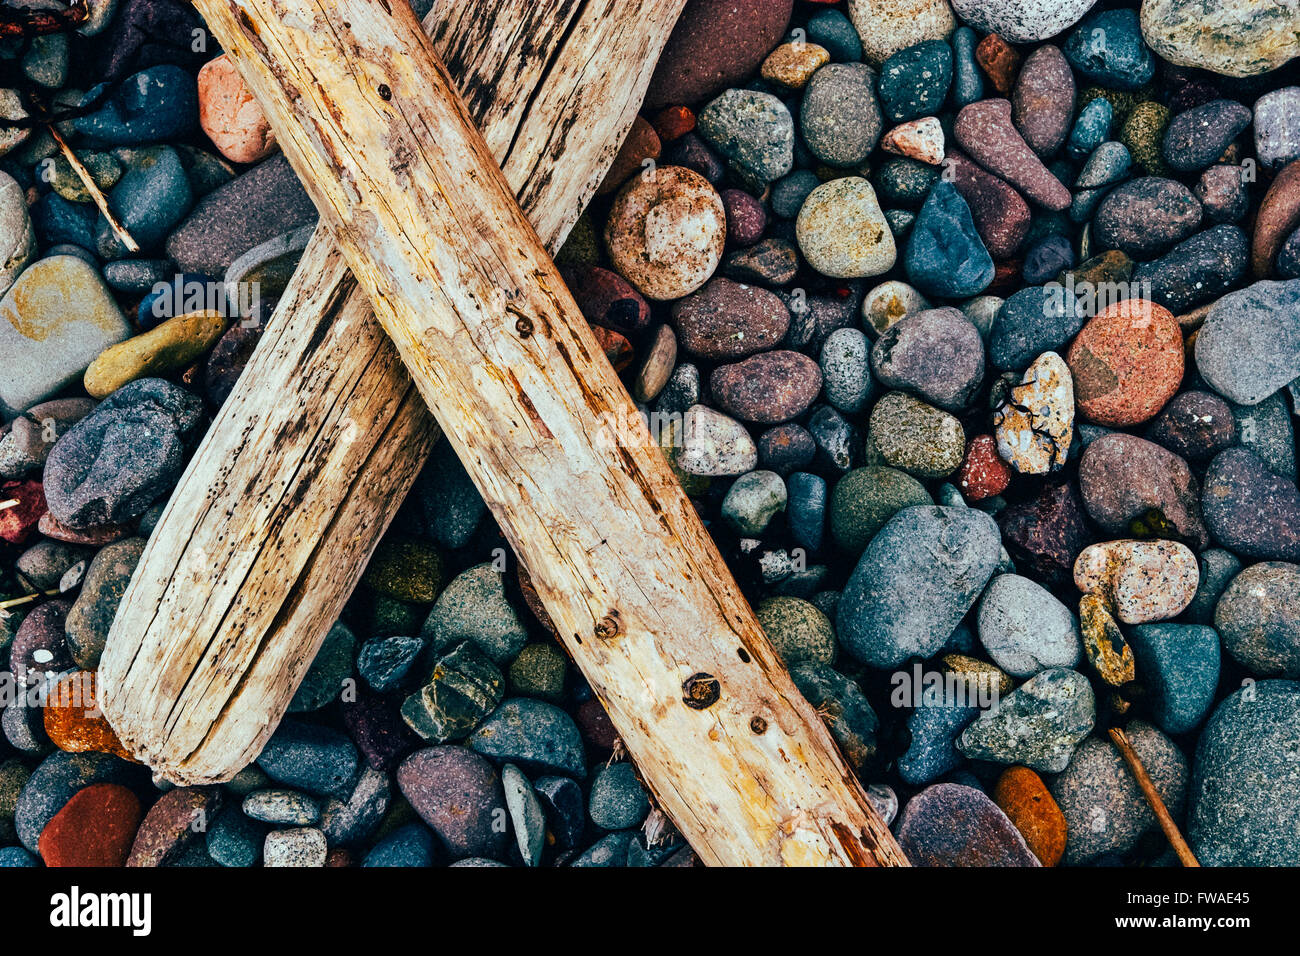 Colorful Stones and Driftwood Stock Photo